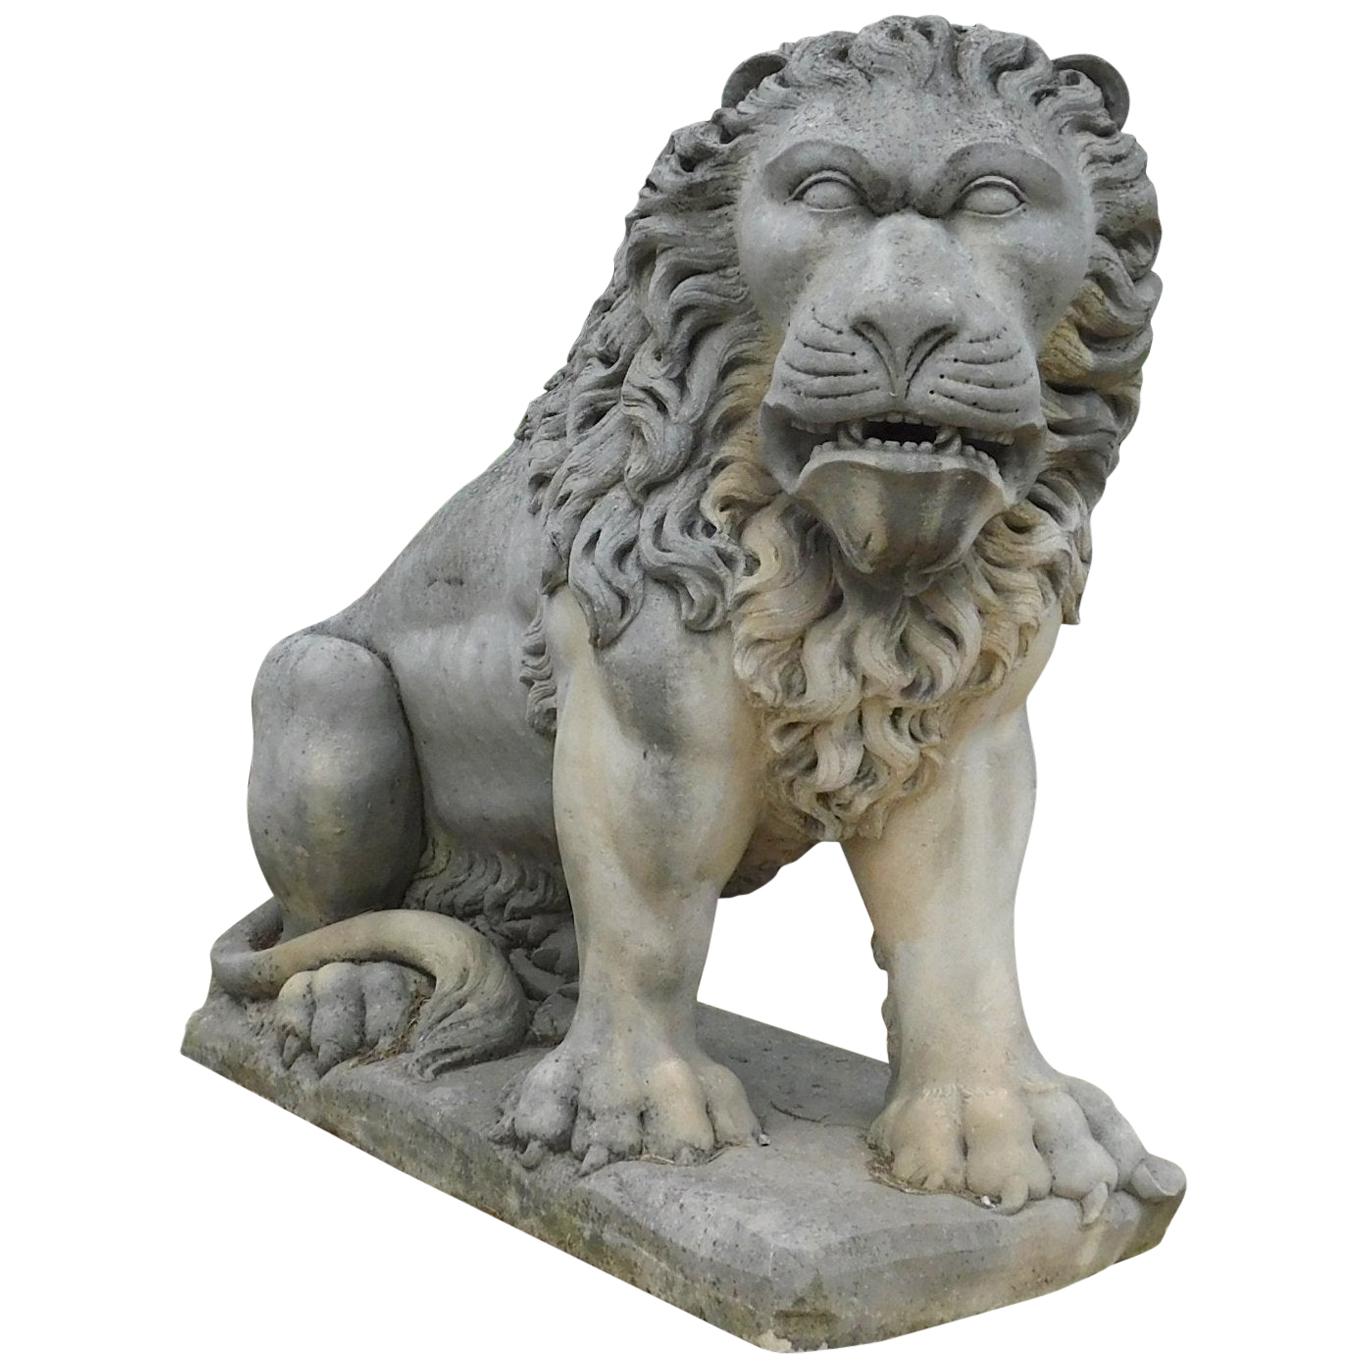 Antique Huge and Powerful Lion Sculpture in Vicenza Stone, 19th Century Italy